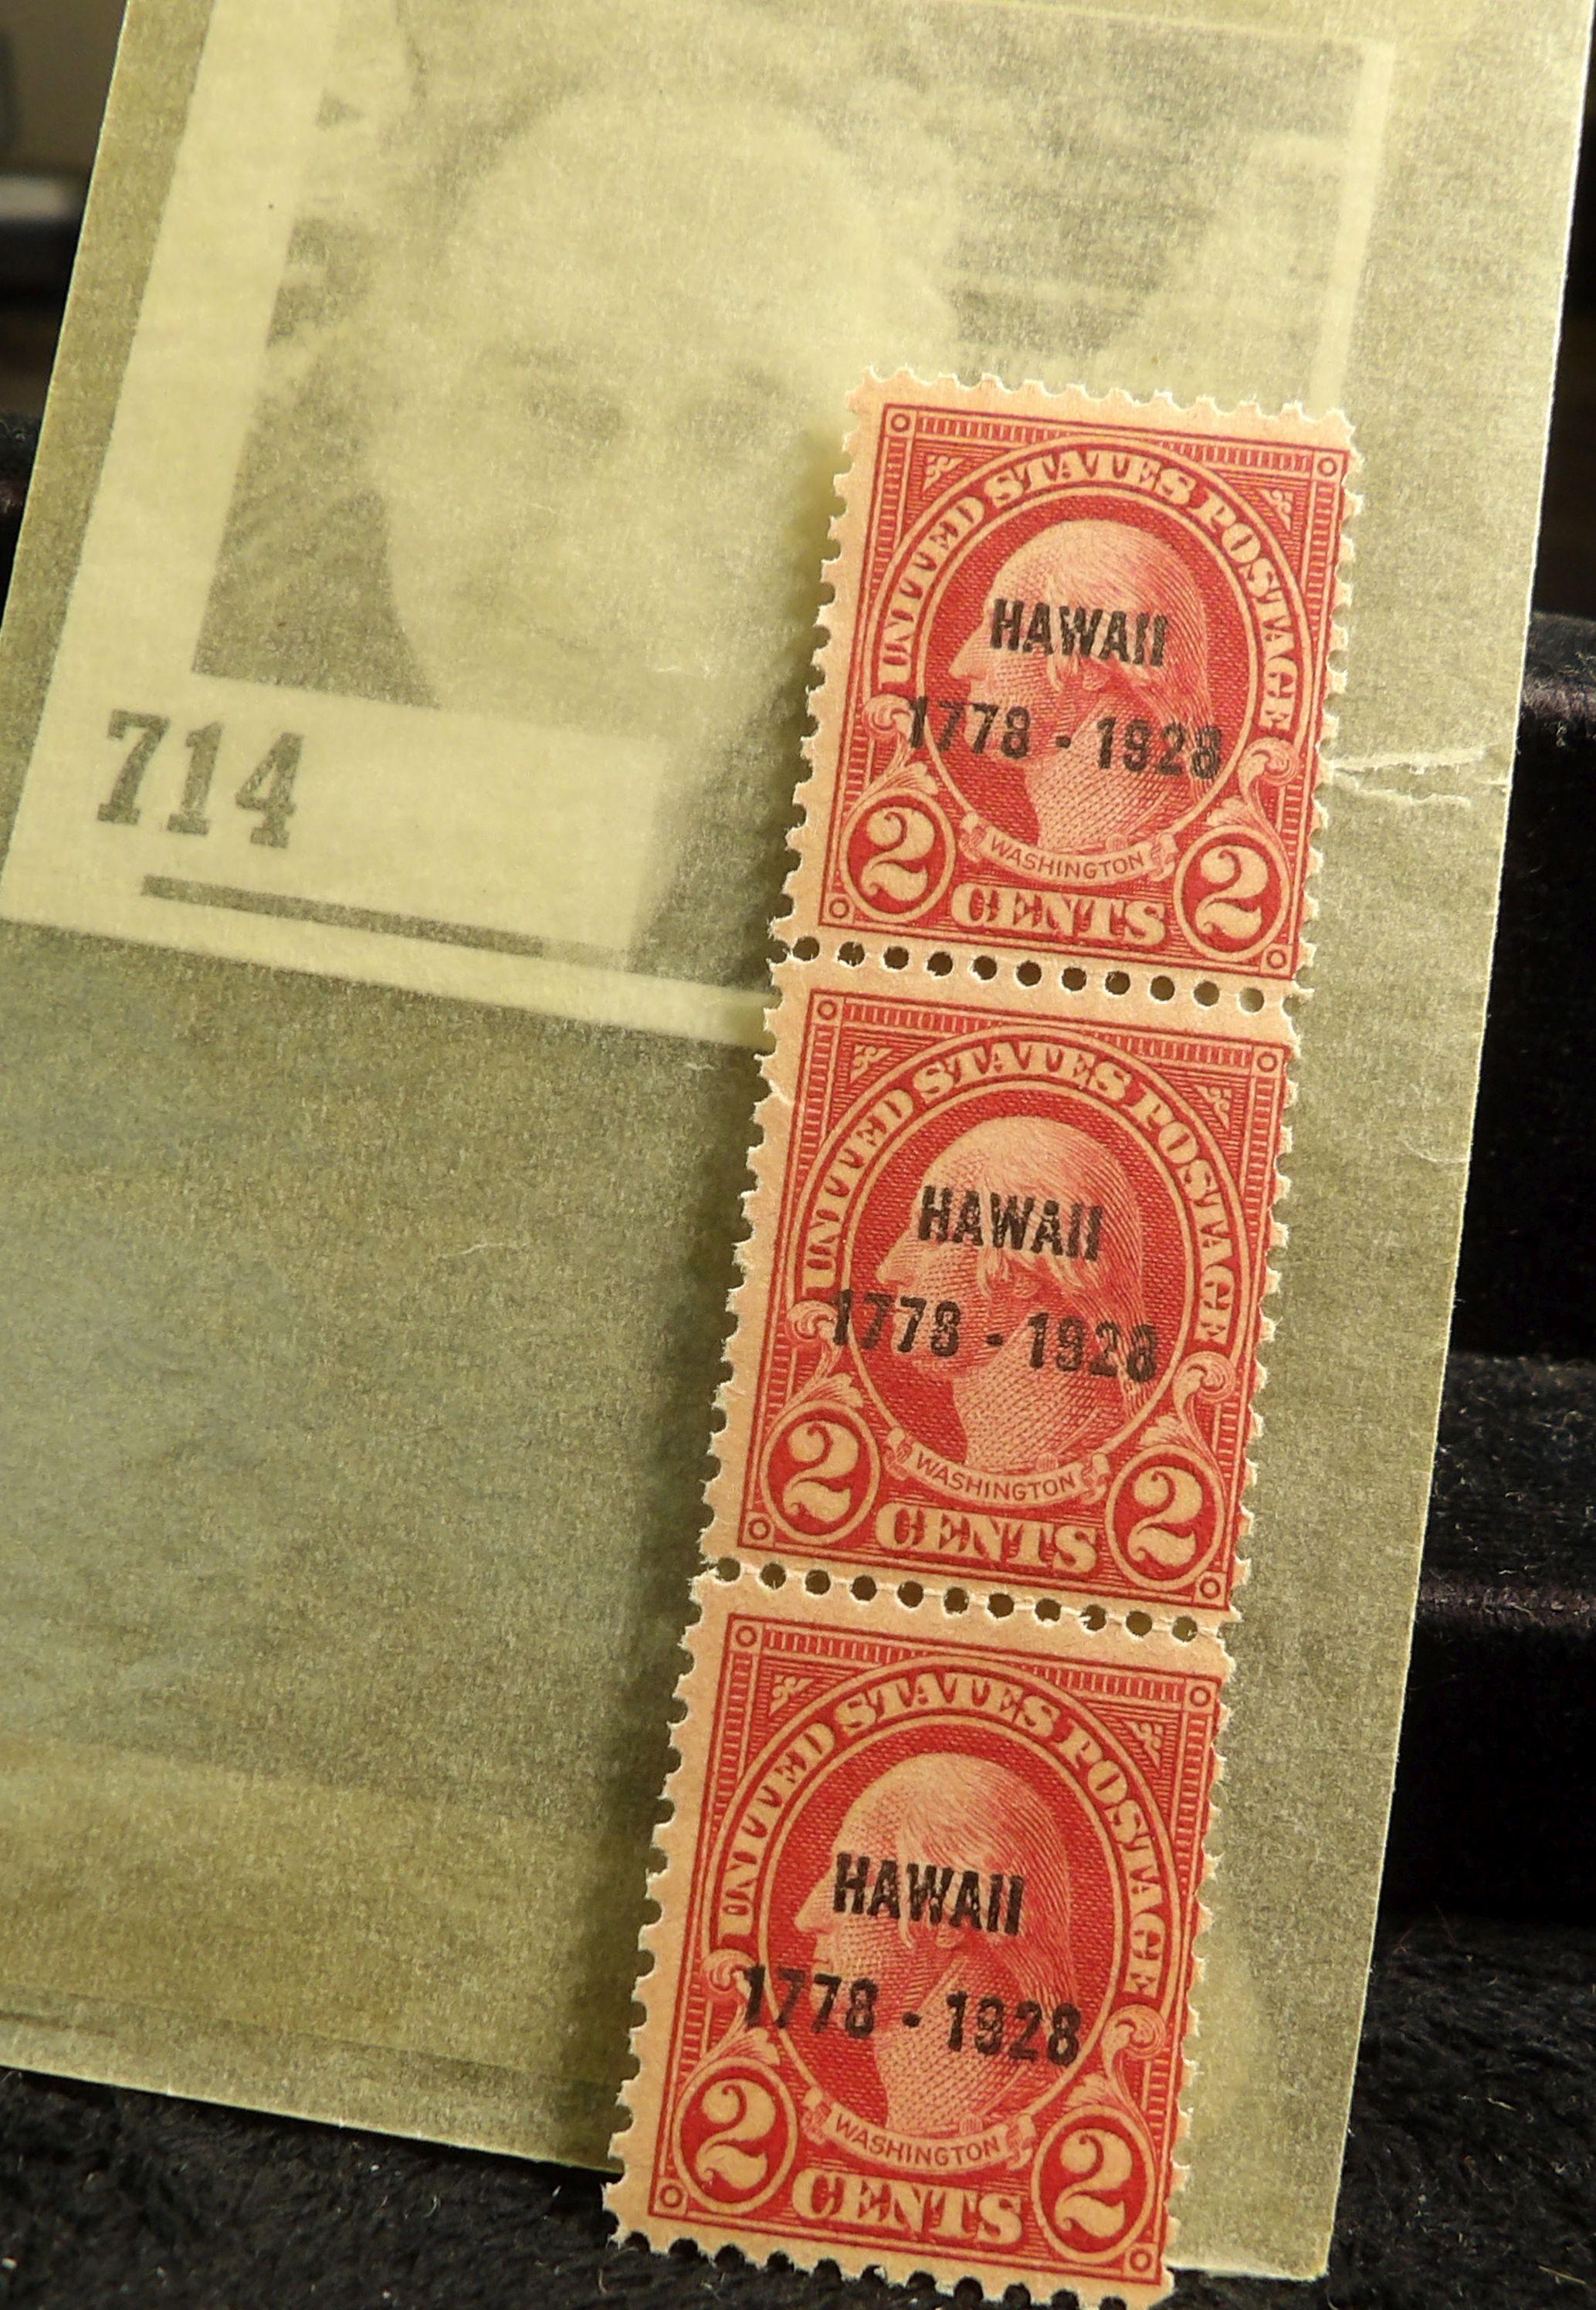 Three attached Precancelled George Washington Two Cent Stamps precancelled "Hawaii/1778-1928".